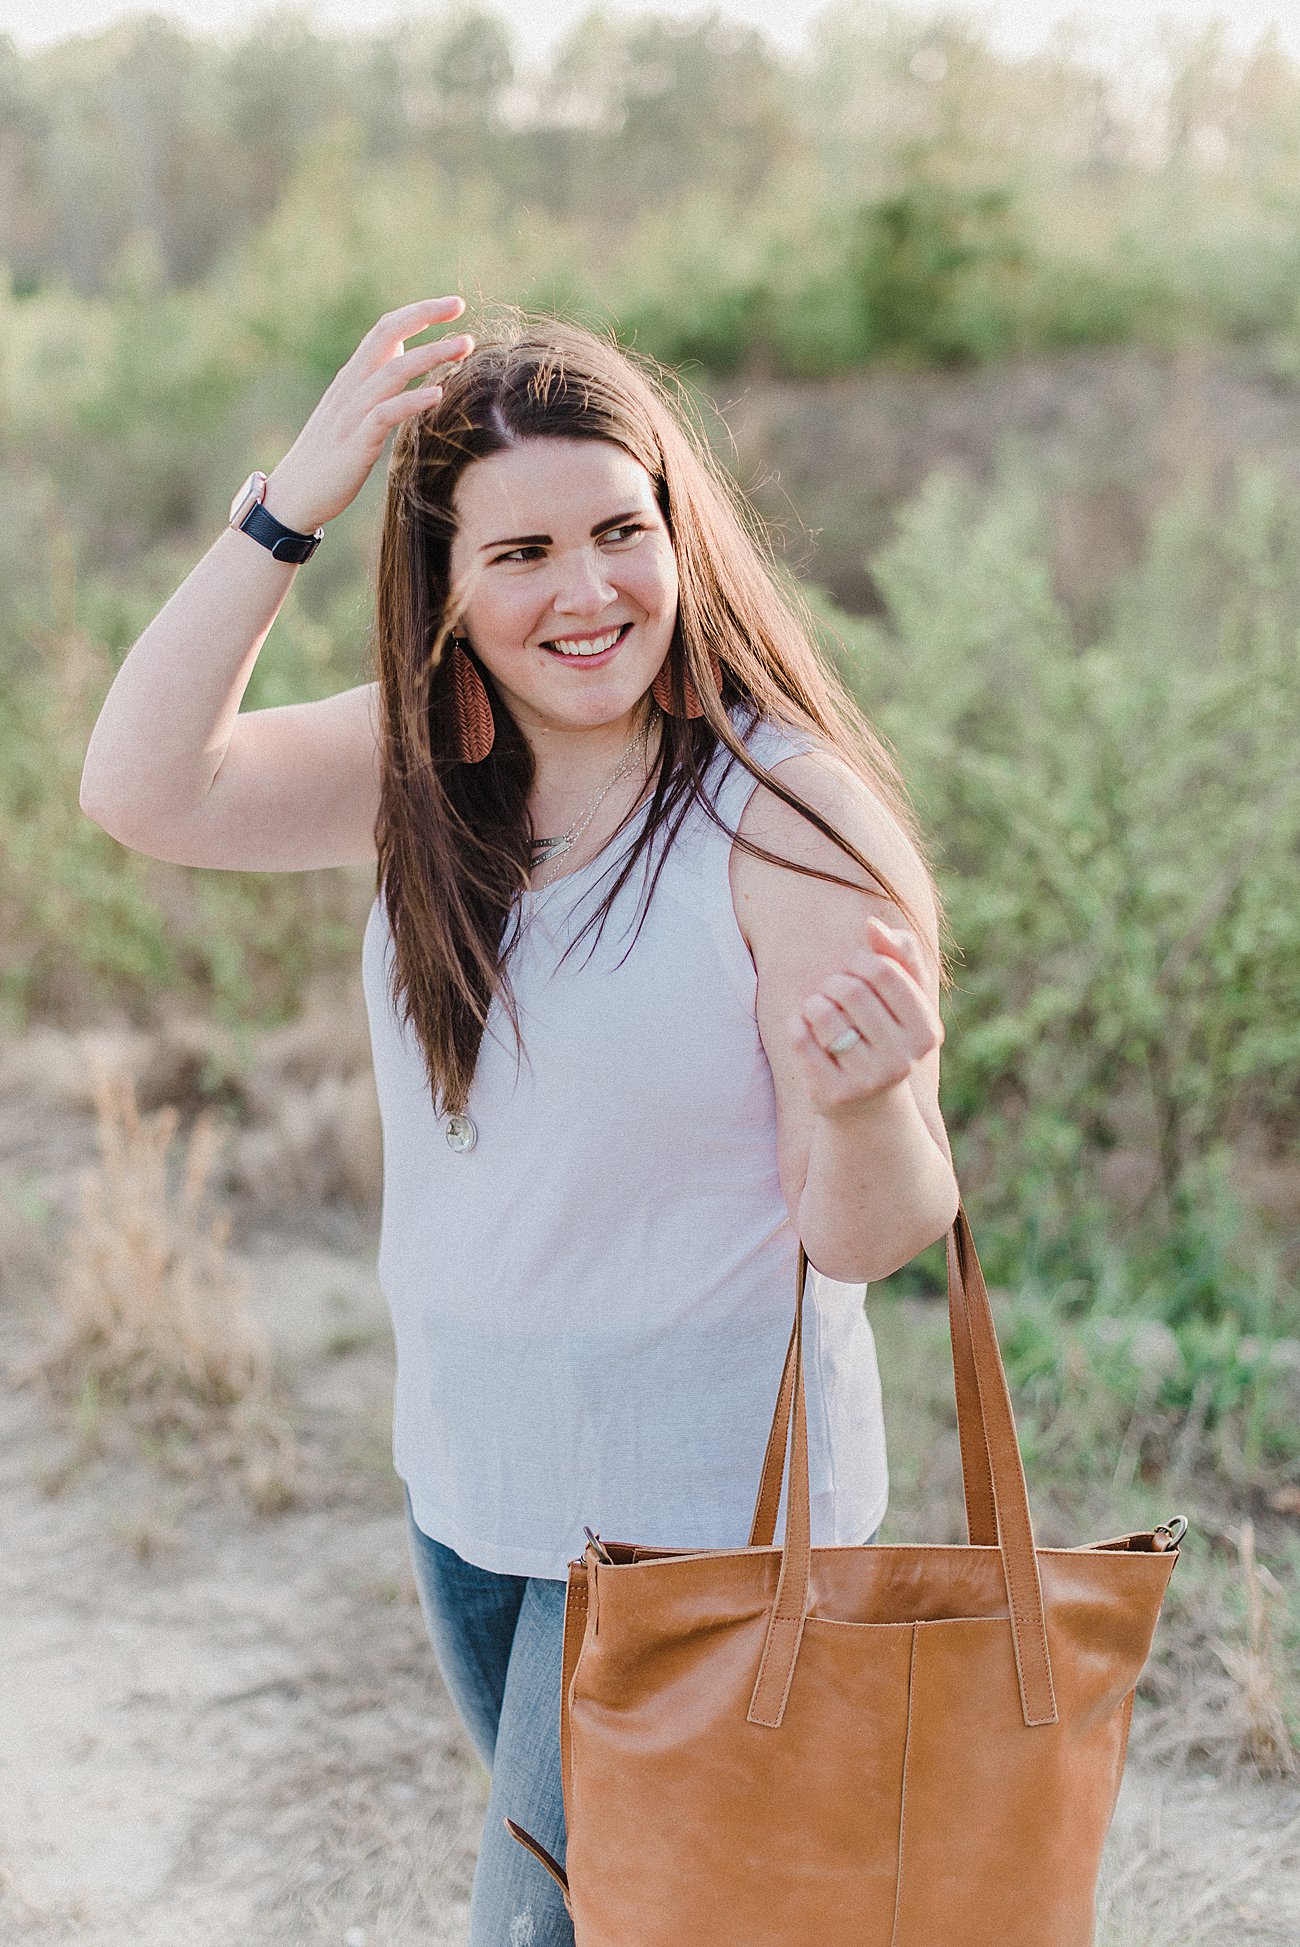 prAna Organic Cotton - Ethical and Fair Trade Fashion #GoOrganic #prAnaSpring18 (3) - prAna Organic Cotton Clothing styled by popular North Carolina ethical fashion blogger Still Being Molly